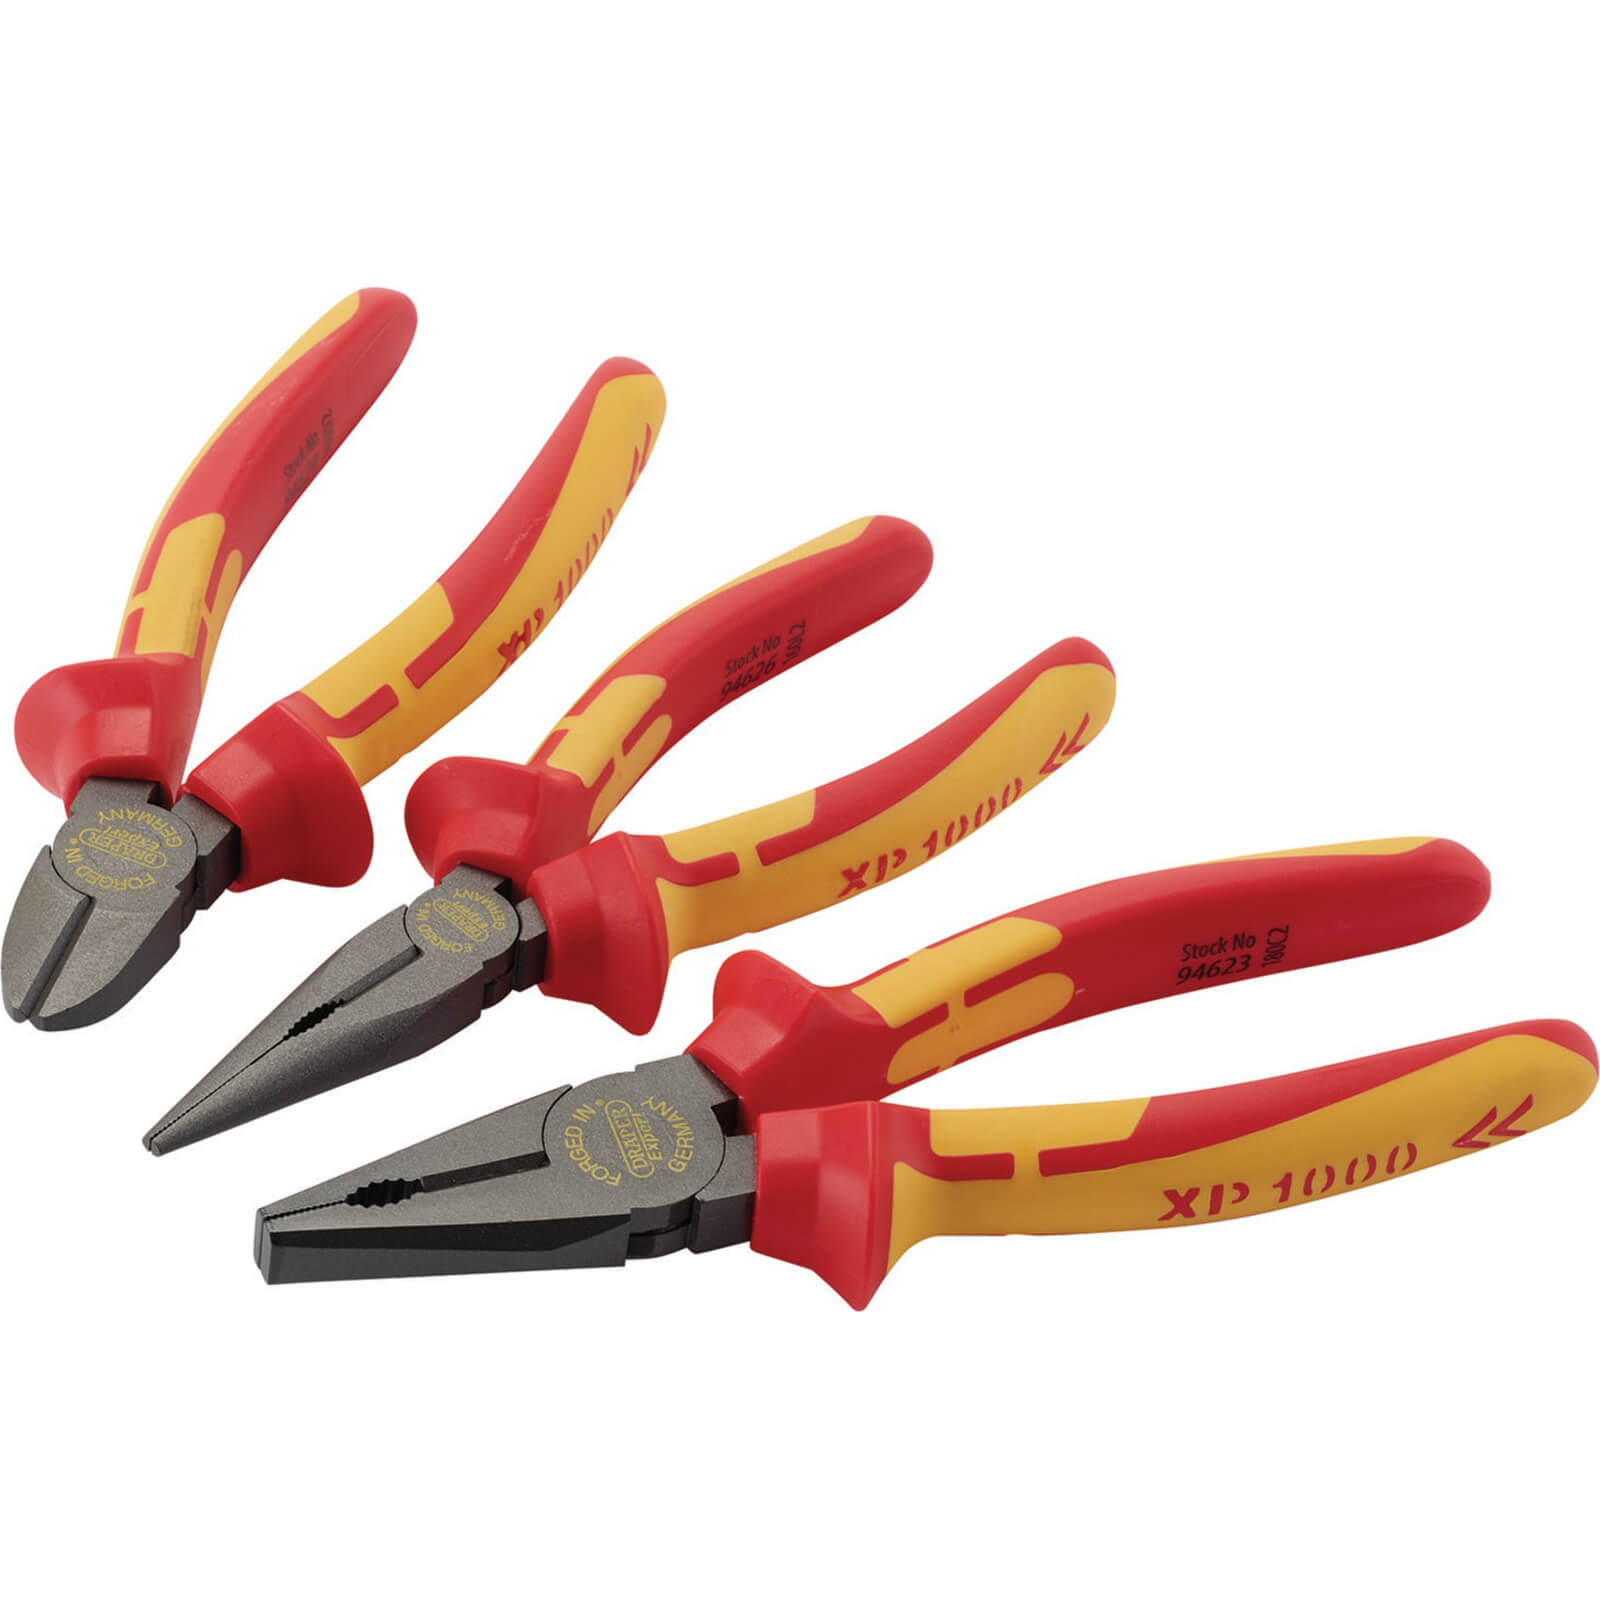 Image of Draper 3 Piece XP1000 VDE Insulated Pliers Set